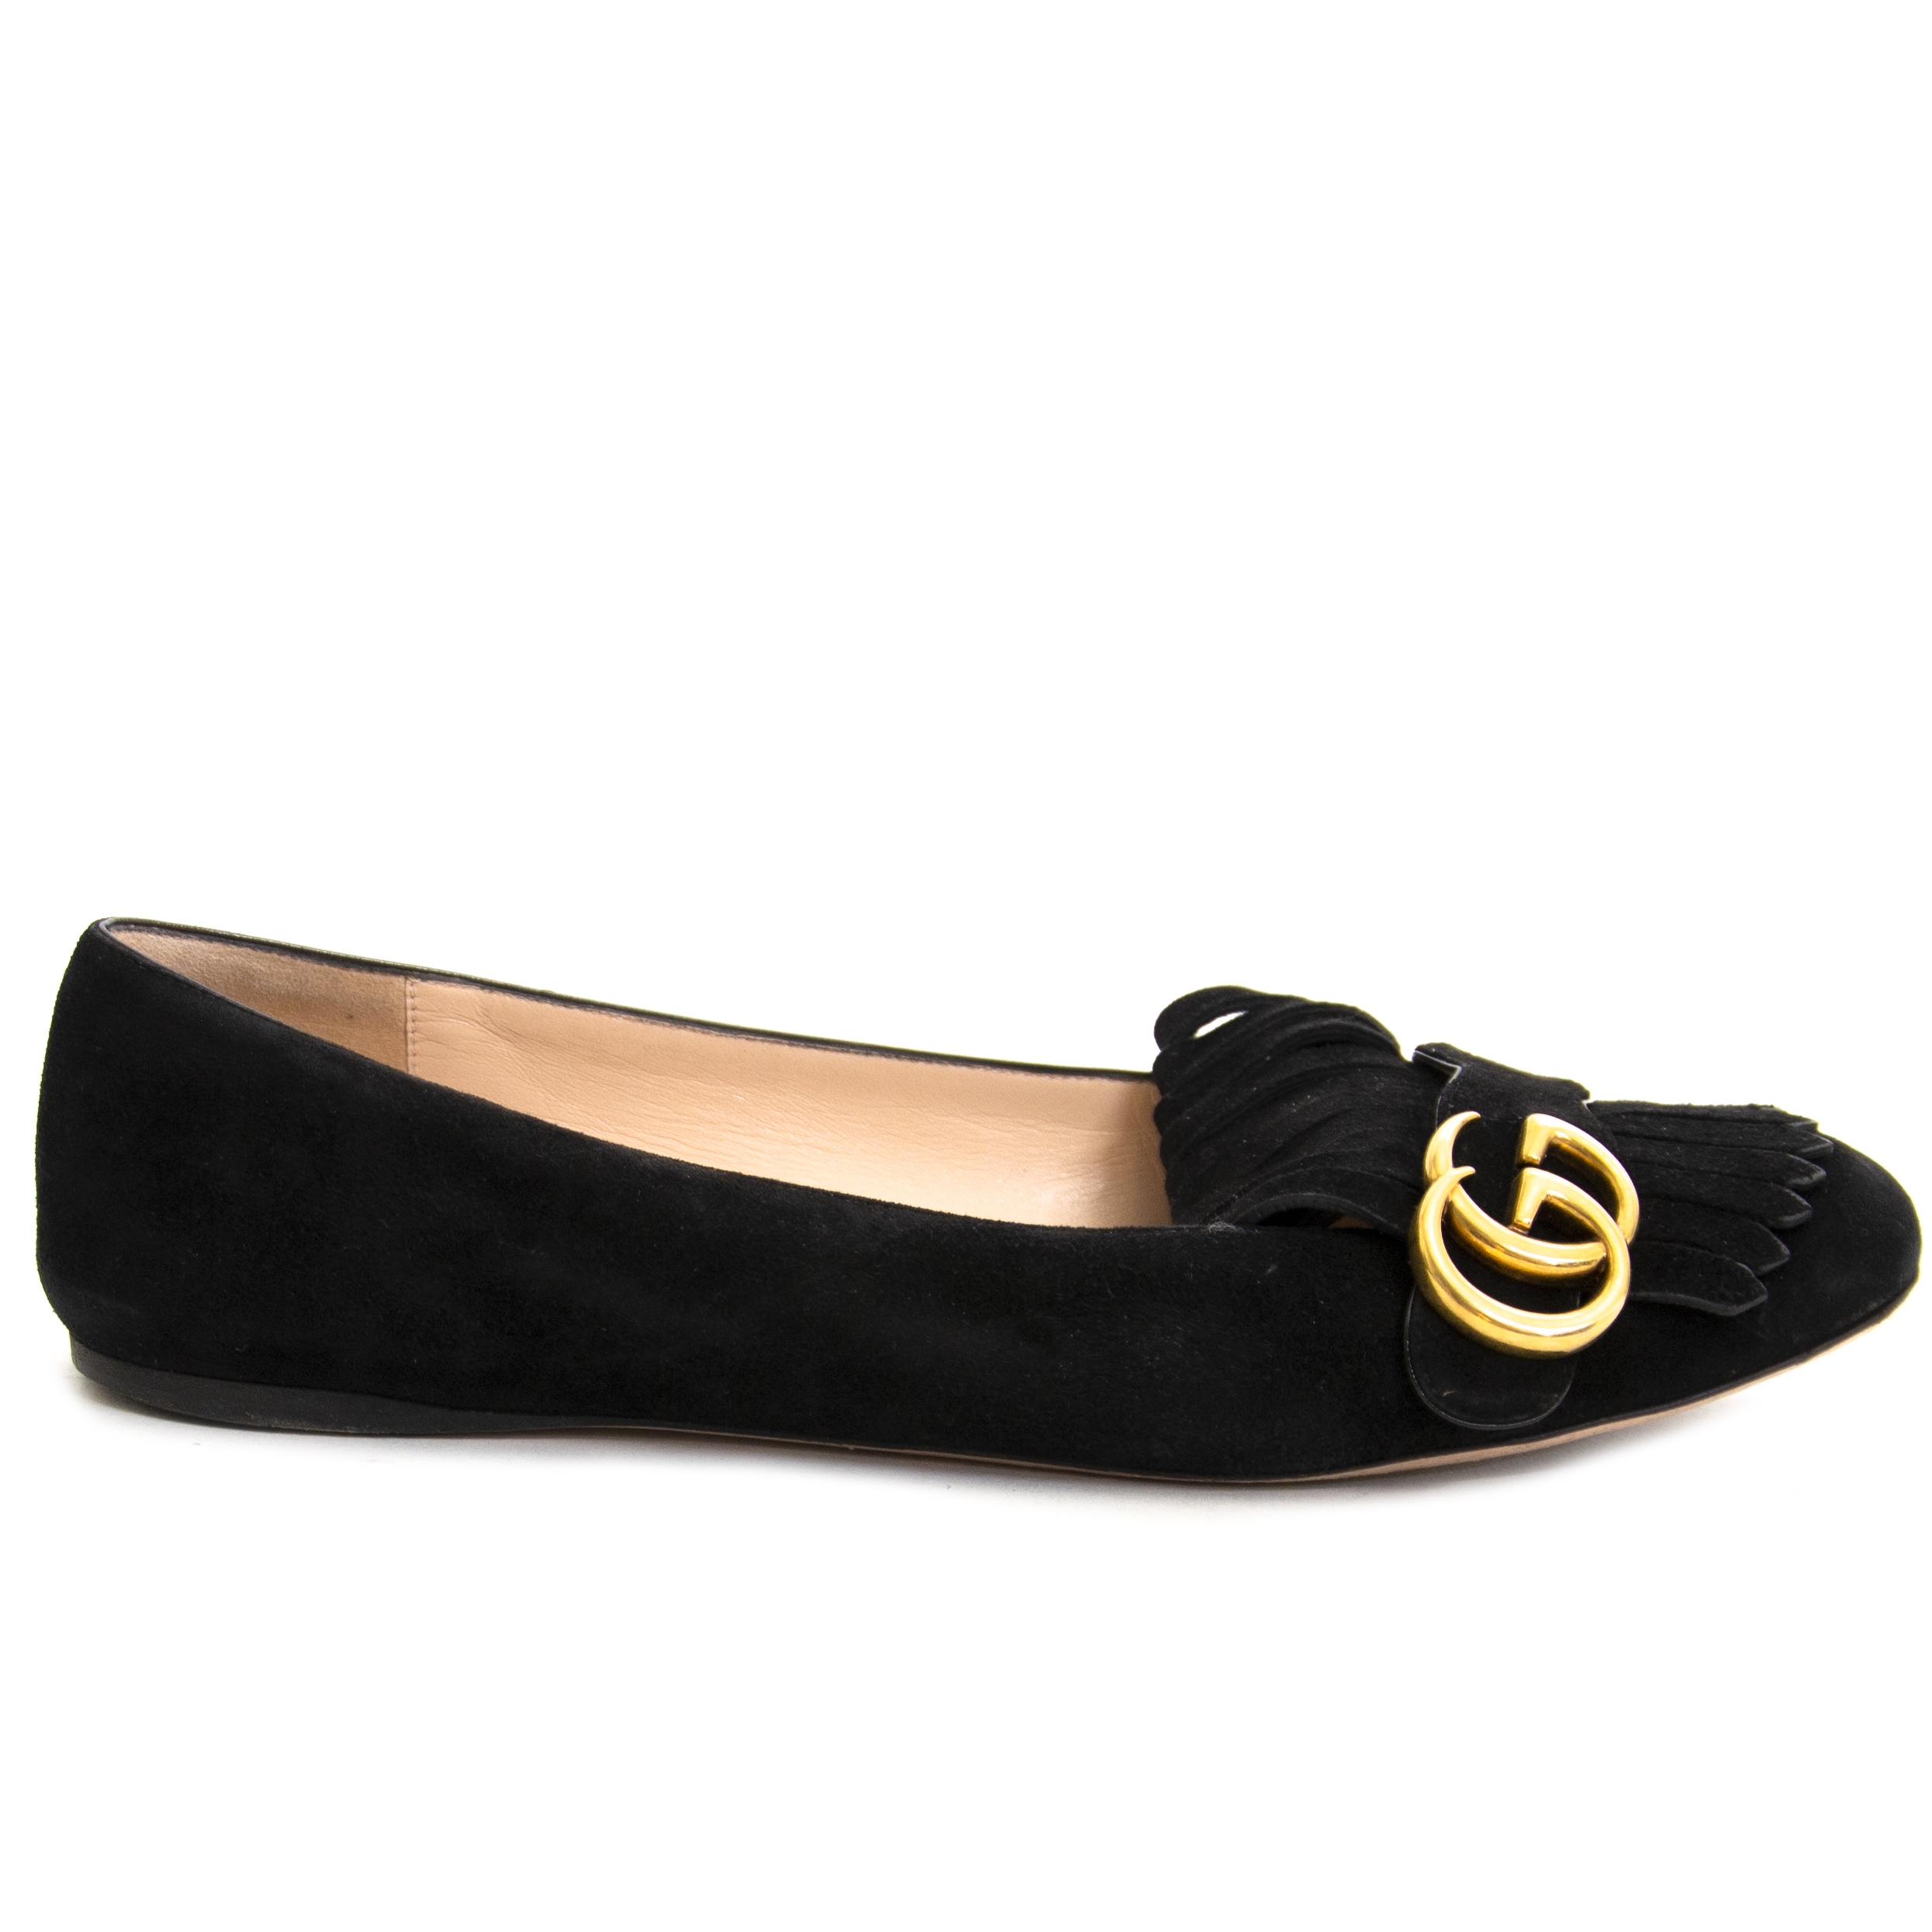 gucci marmont suede ballerina flat